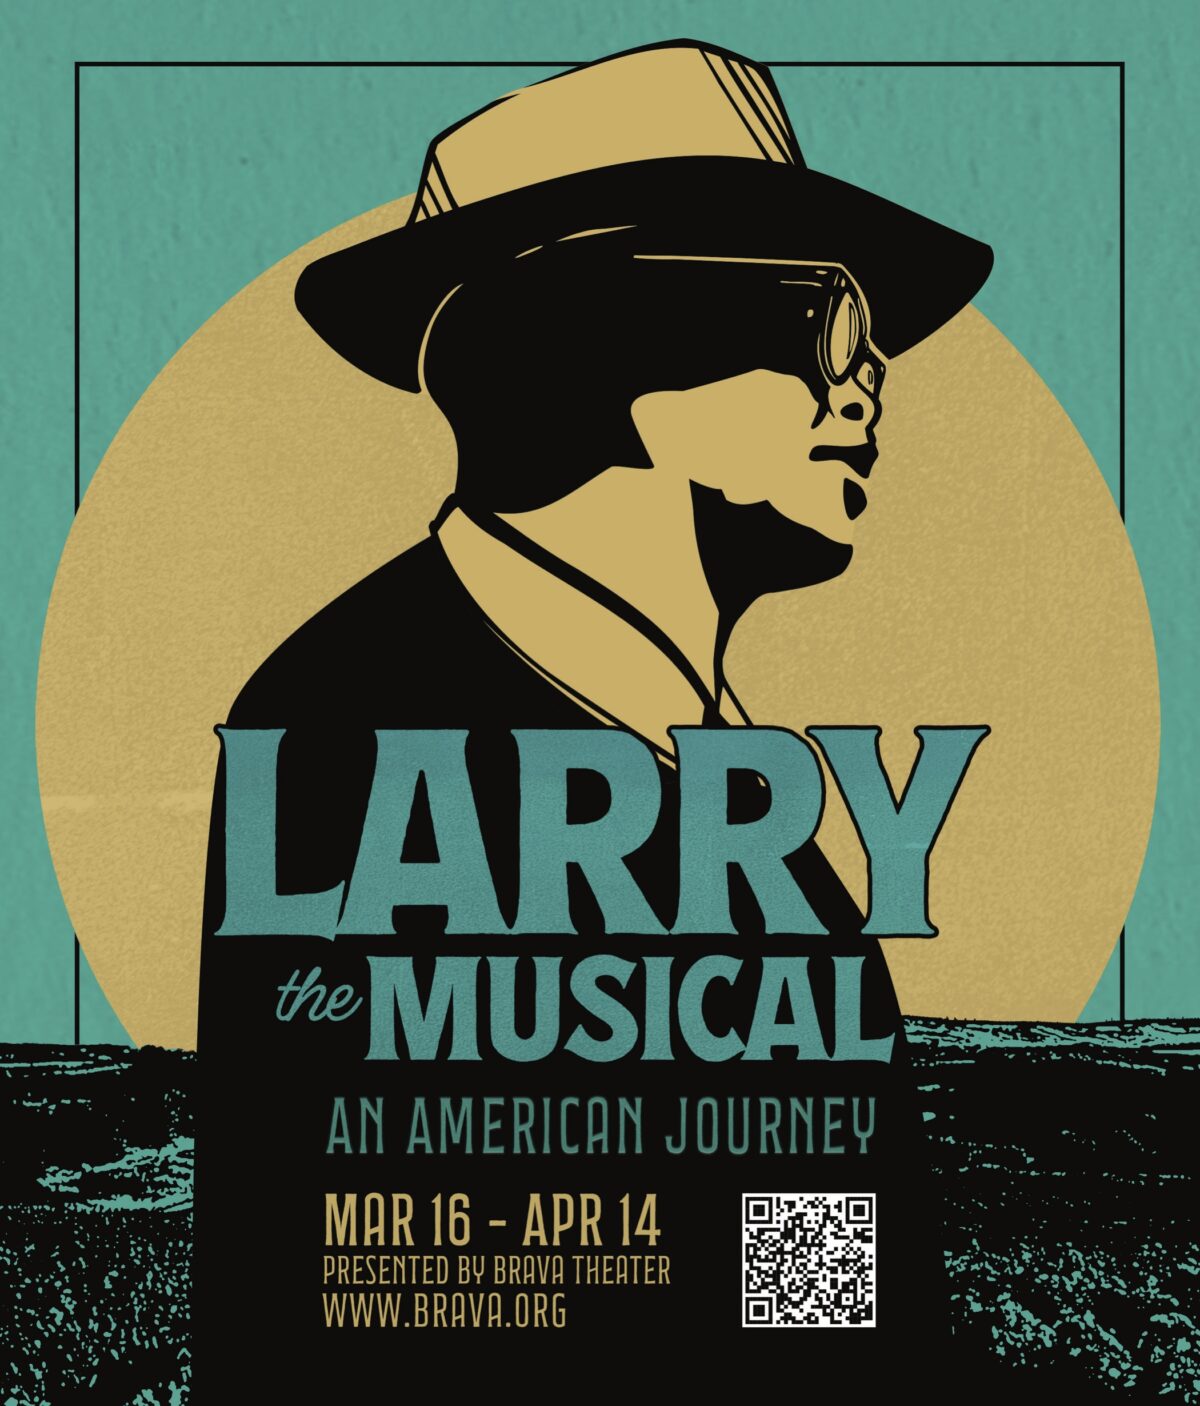 “Larry the Musical” flyer